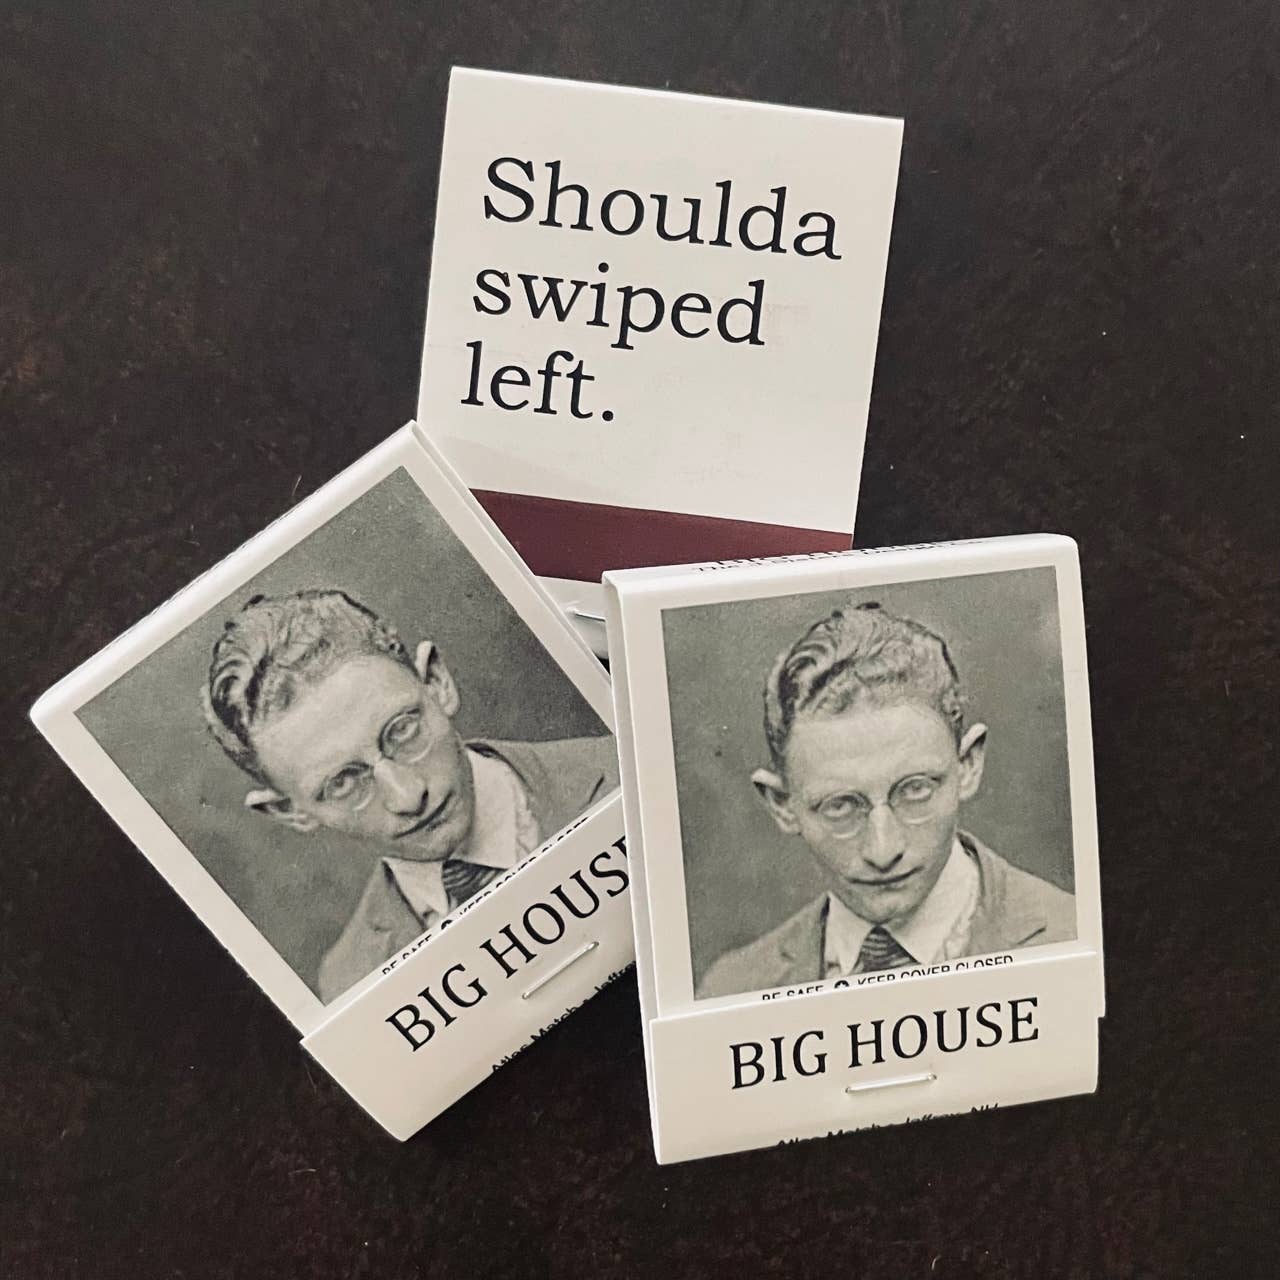 The 3 Sisters Design Co. - BIG House Matches, Shoulda swiped left.